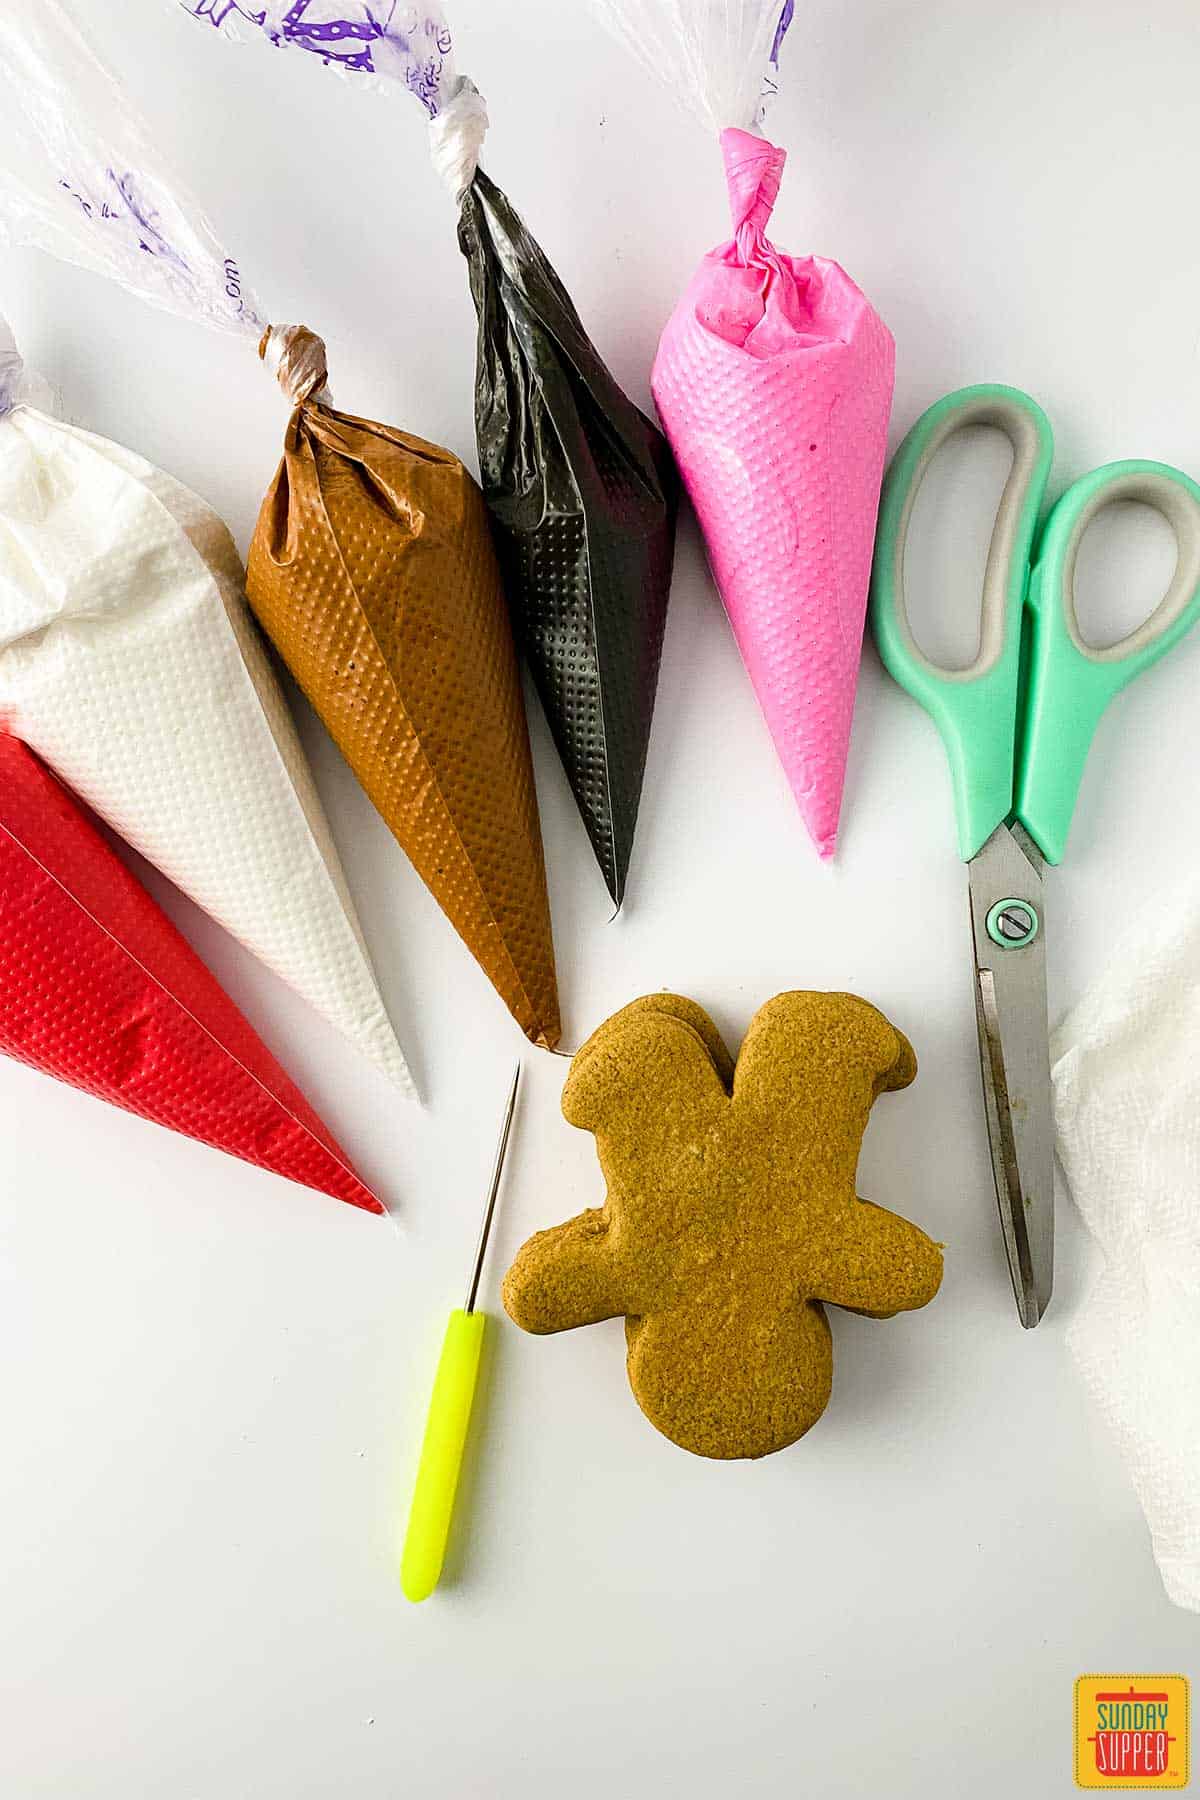 five royal icing bags, scissors, and gingerbread cookies